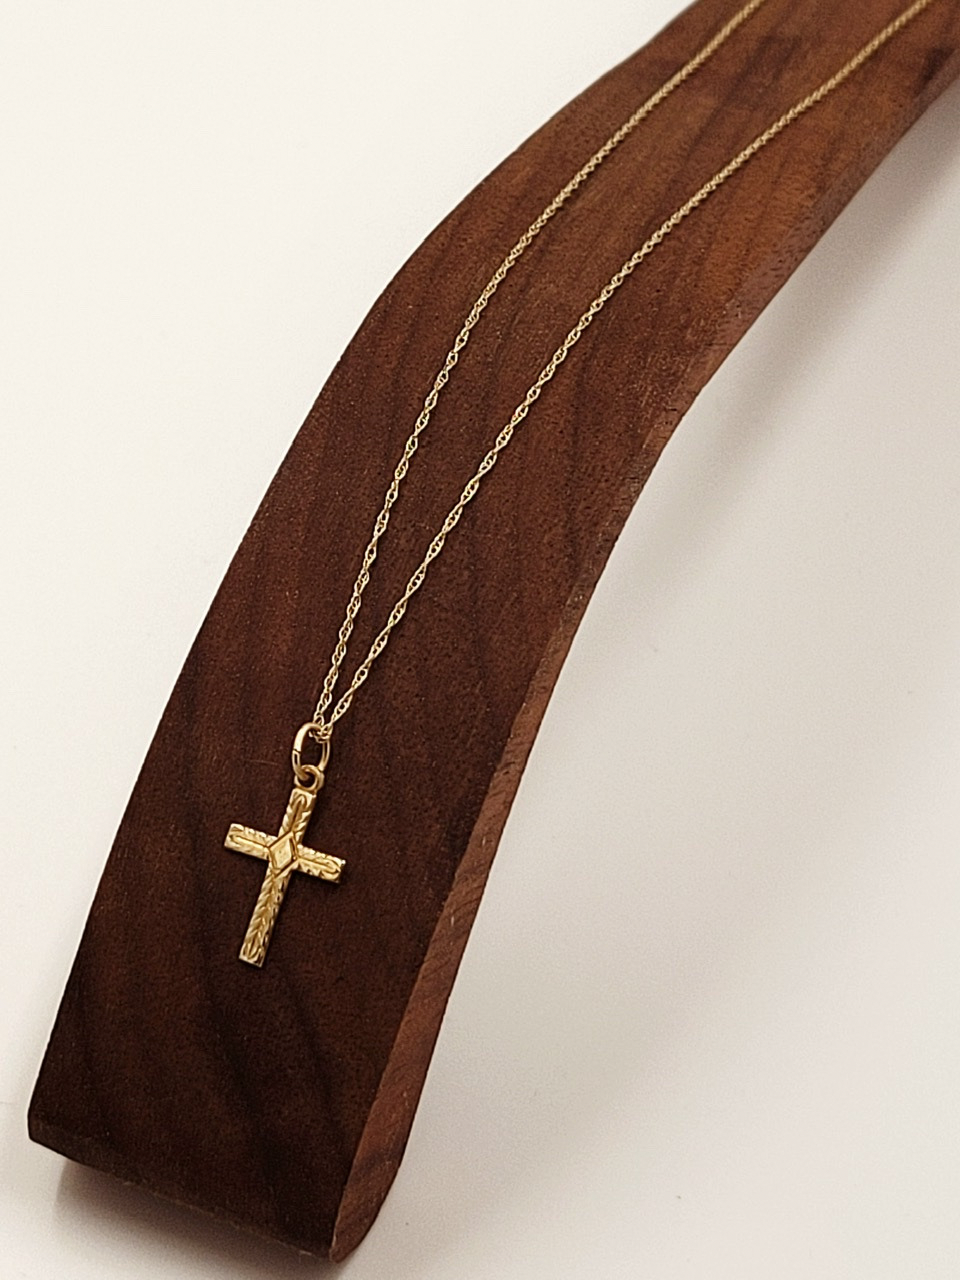 Small Art Deco Gold Cross Necklace